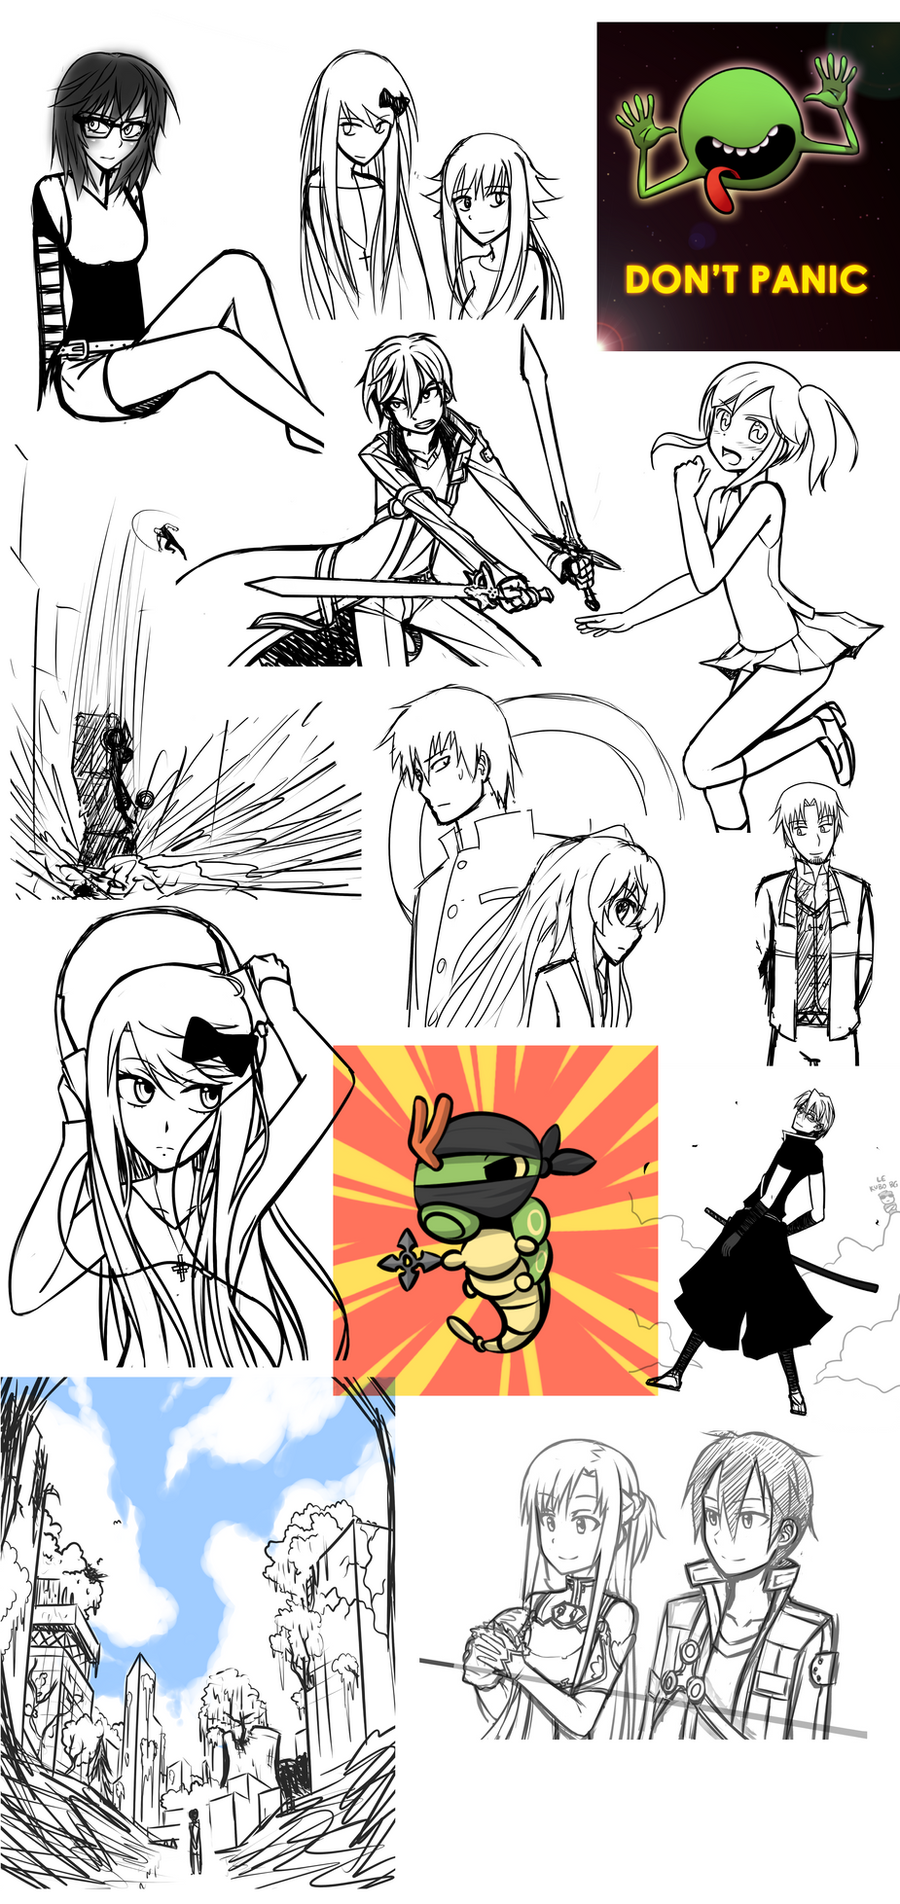 random_unfinished_stuff_from_2012_by_yuzahunter-d5pwmxu.png